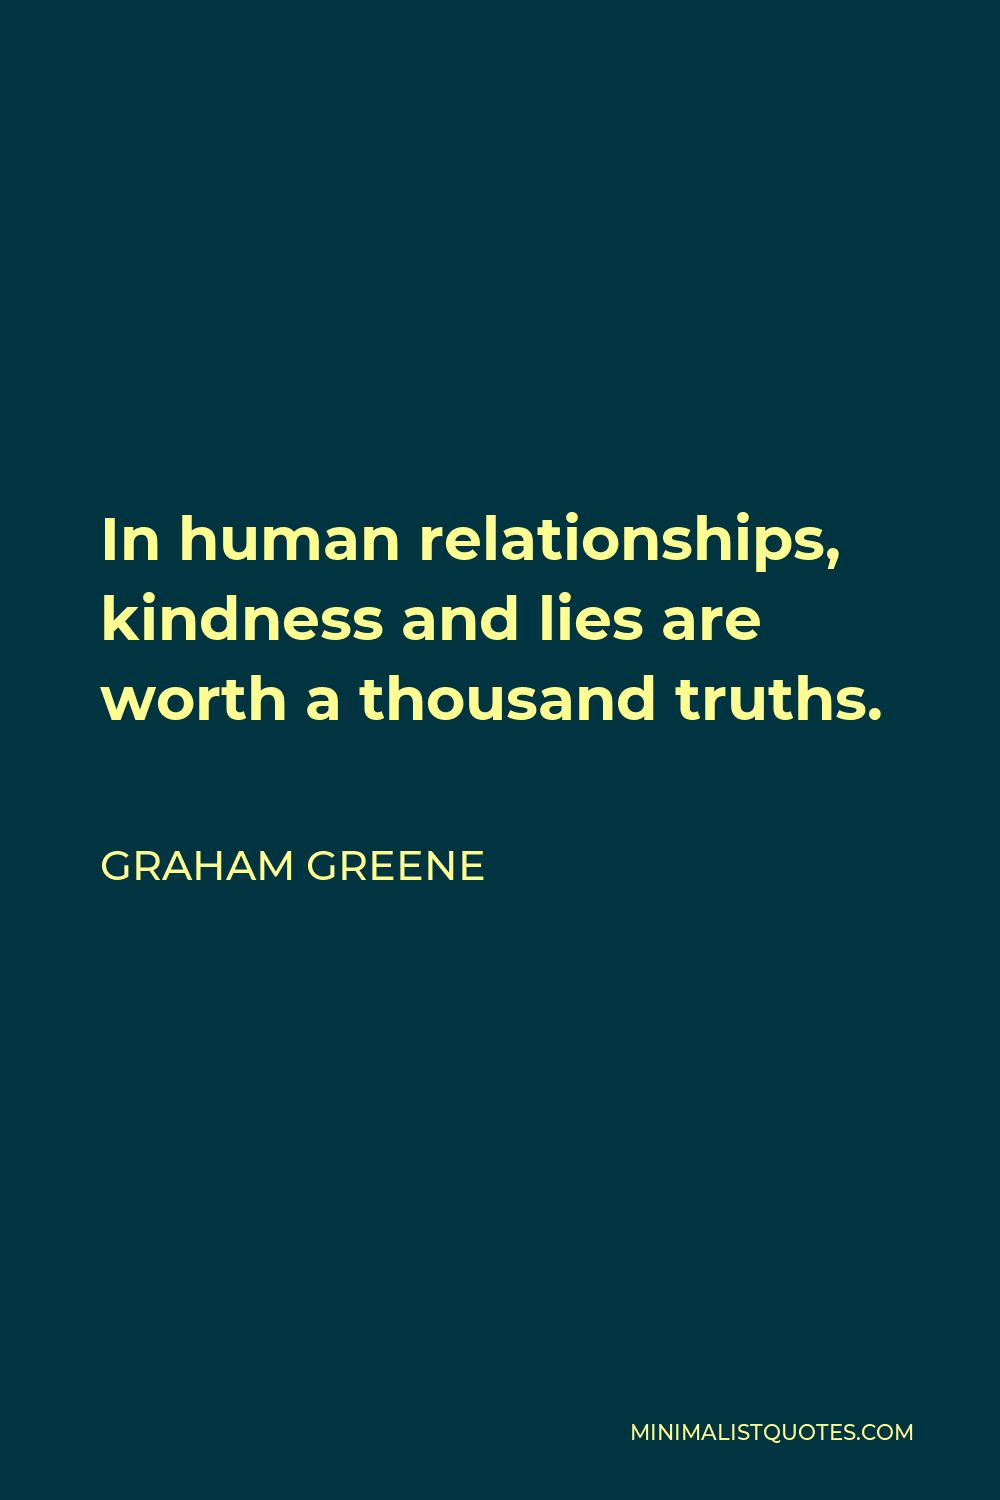 Graham Greene Quote - In human relationships, kindness and lies are worth a thousand truths.